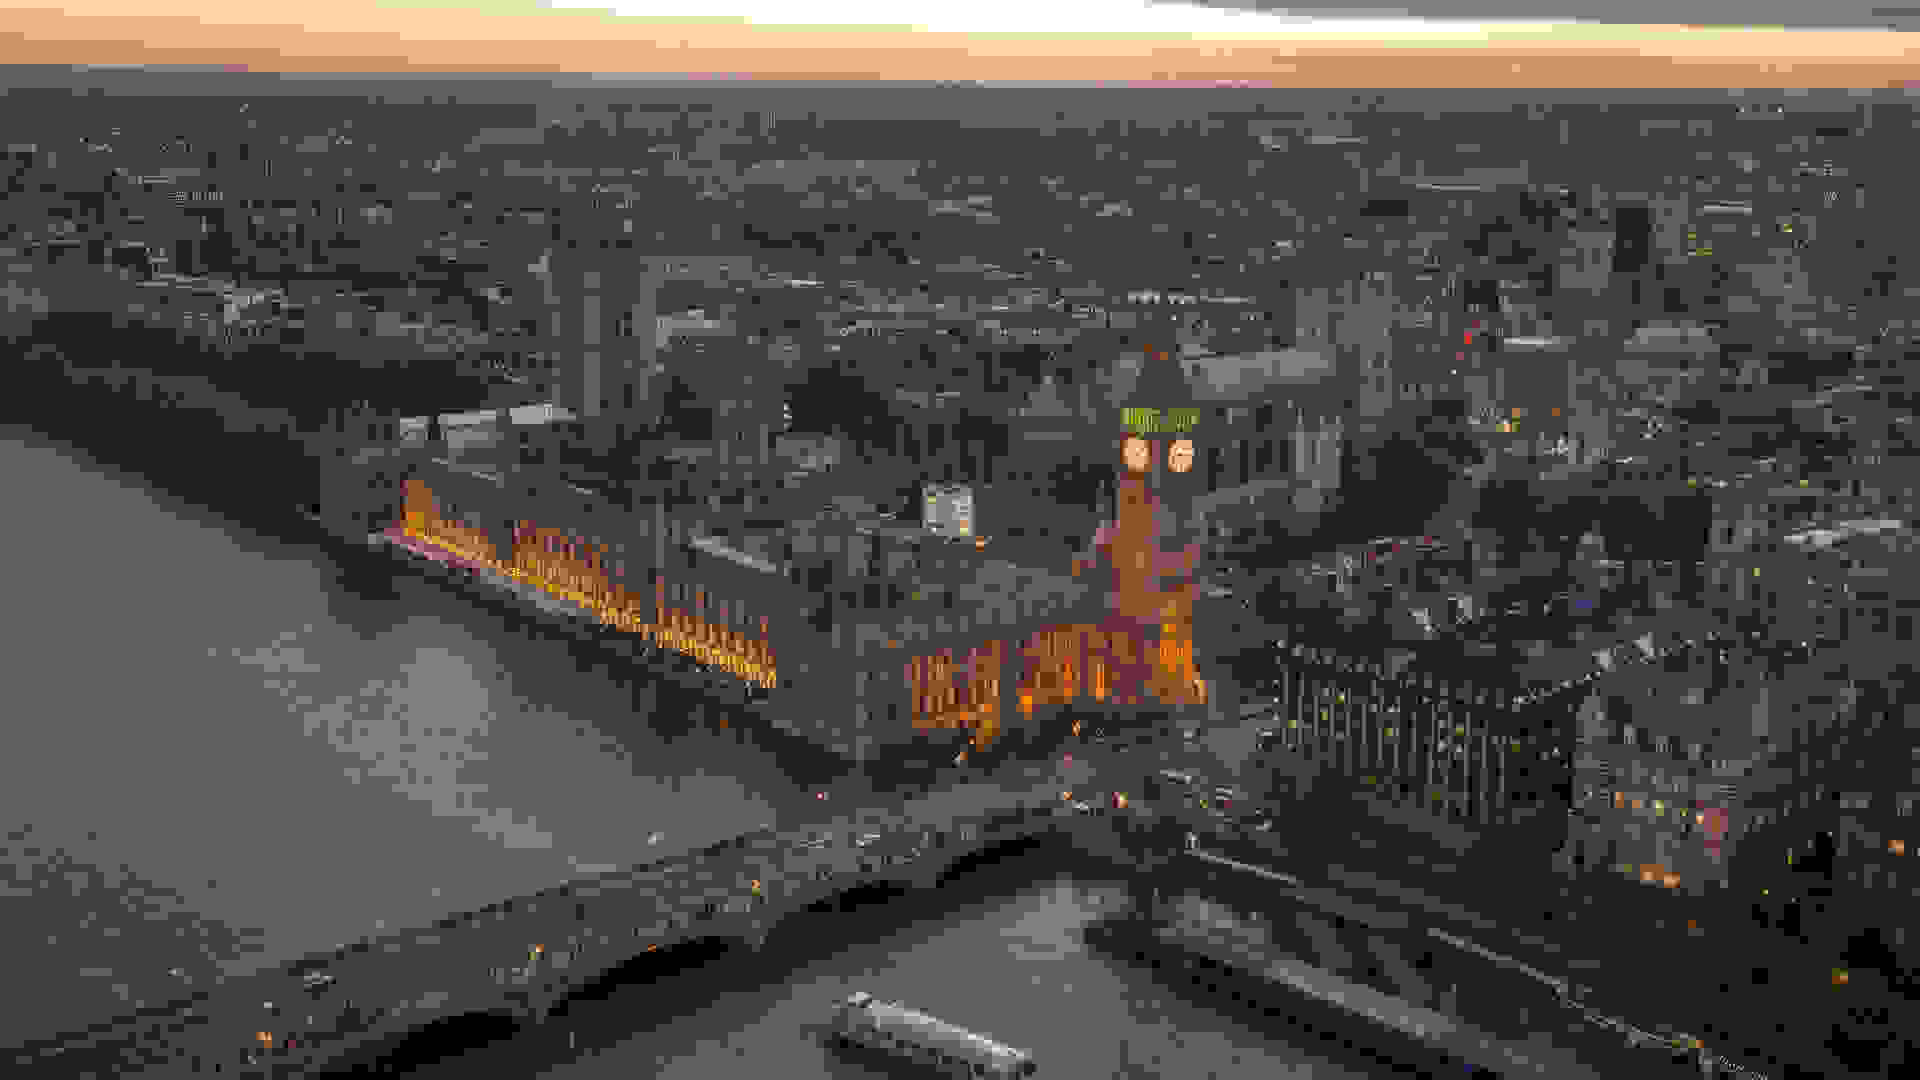 Bird's-eye view of the Palace of Westminster, UK Houses of Parliament